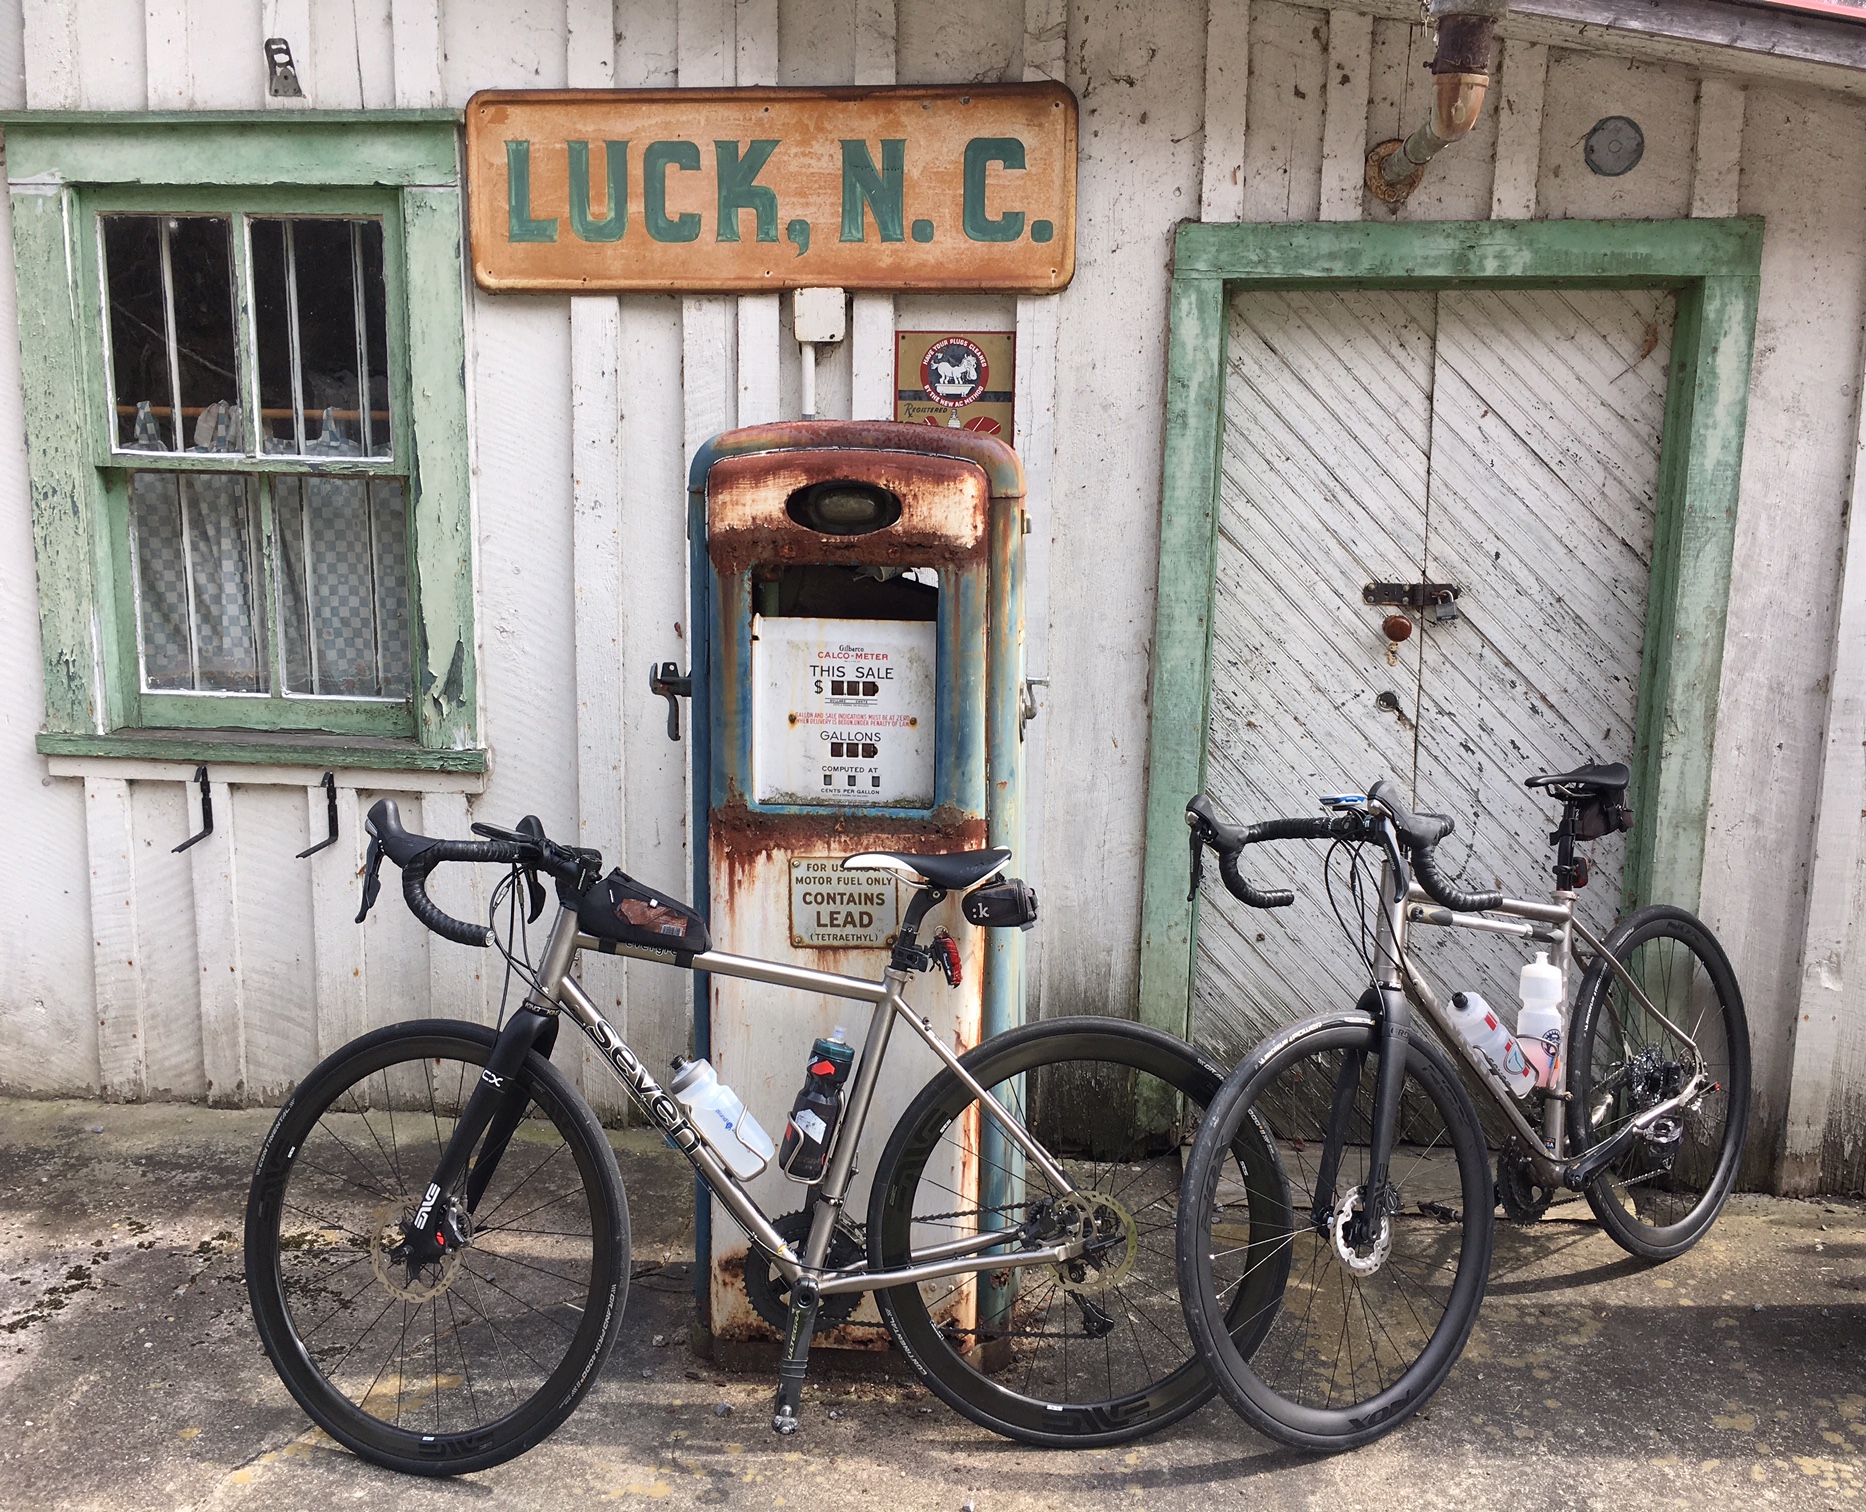 Two Seven touring bikes lean against an abandoned gas station in Luck, North Carolina